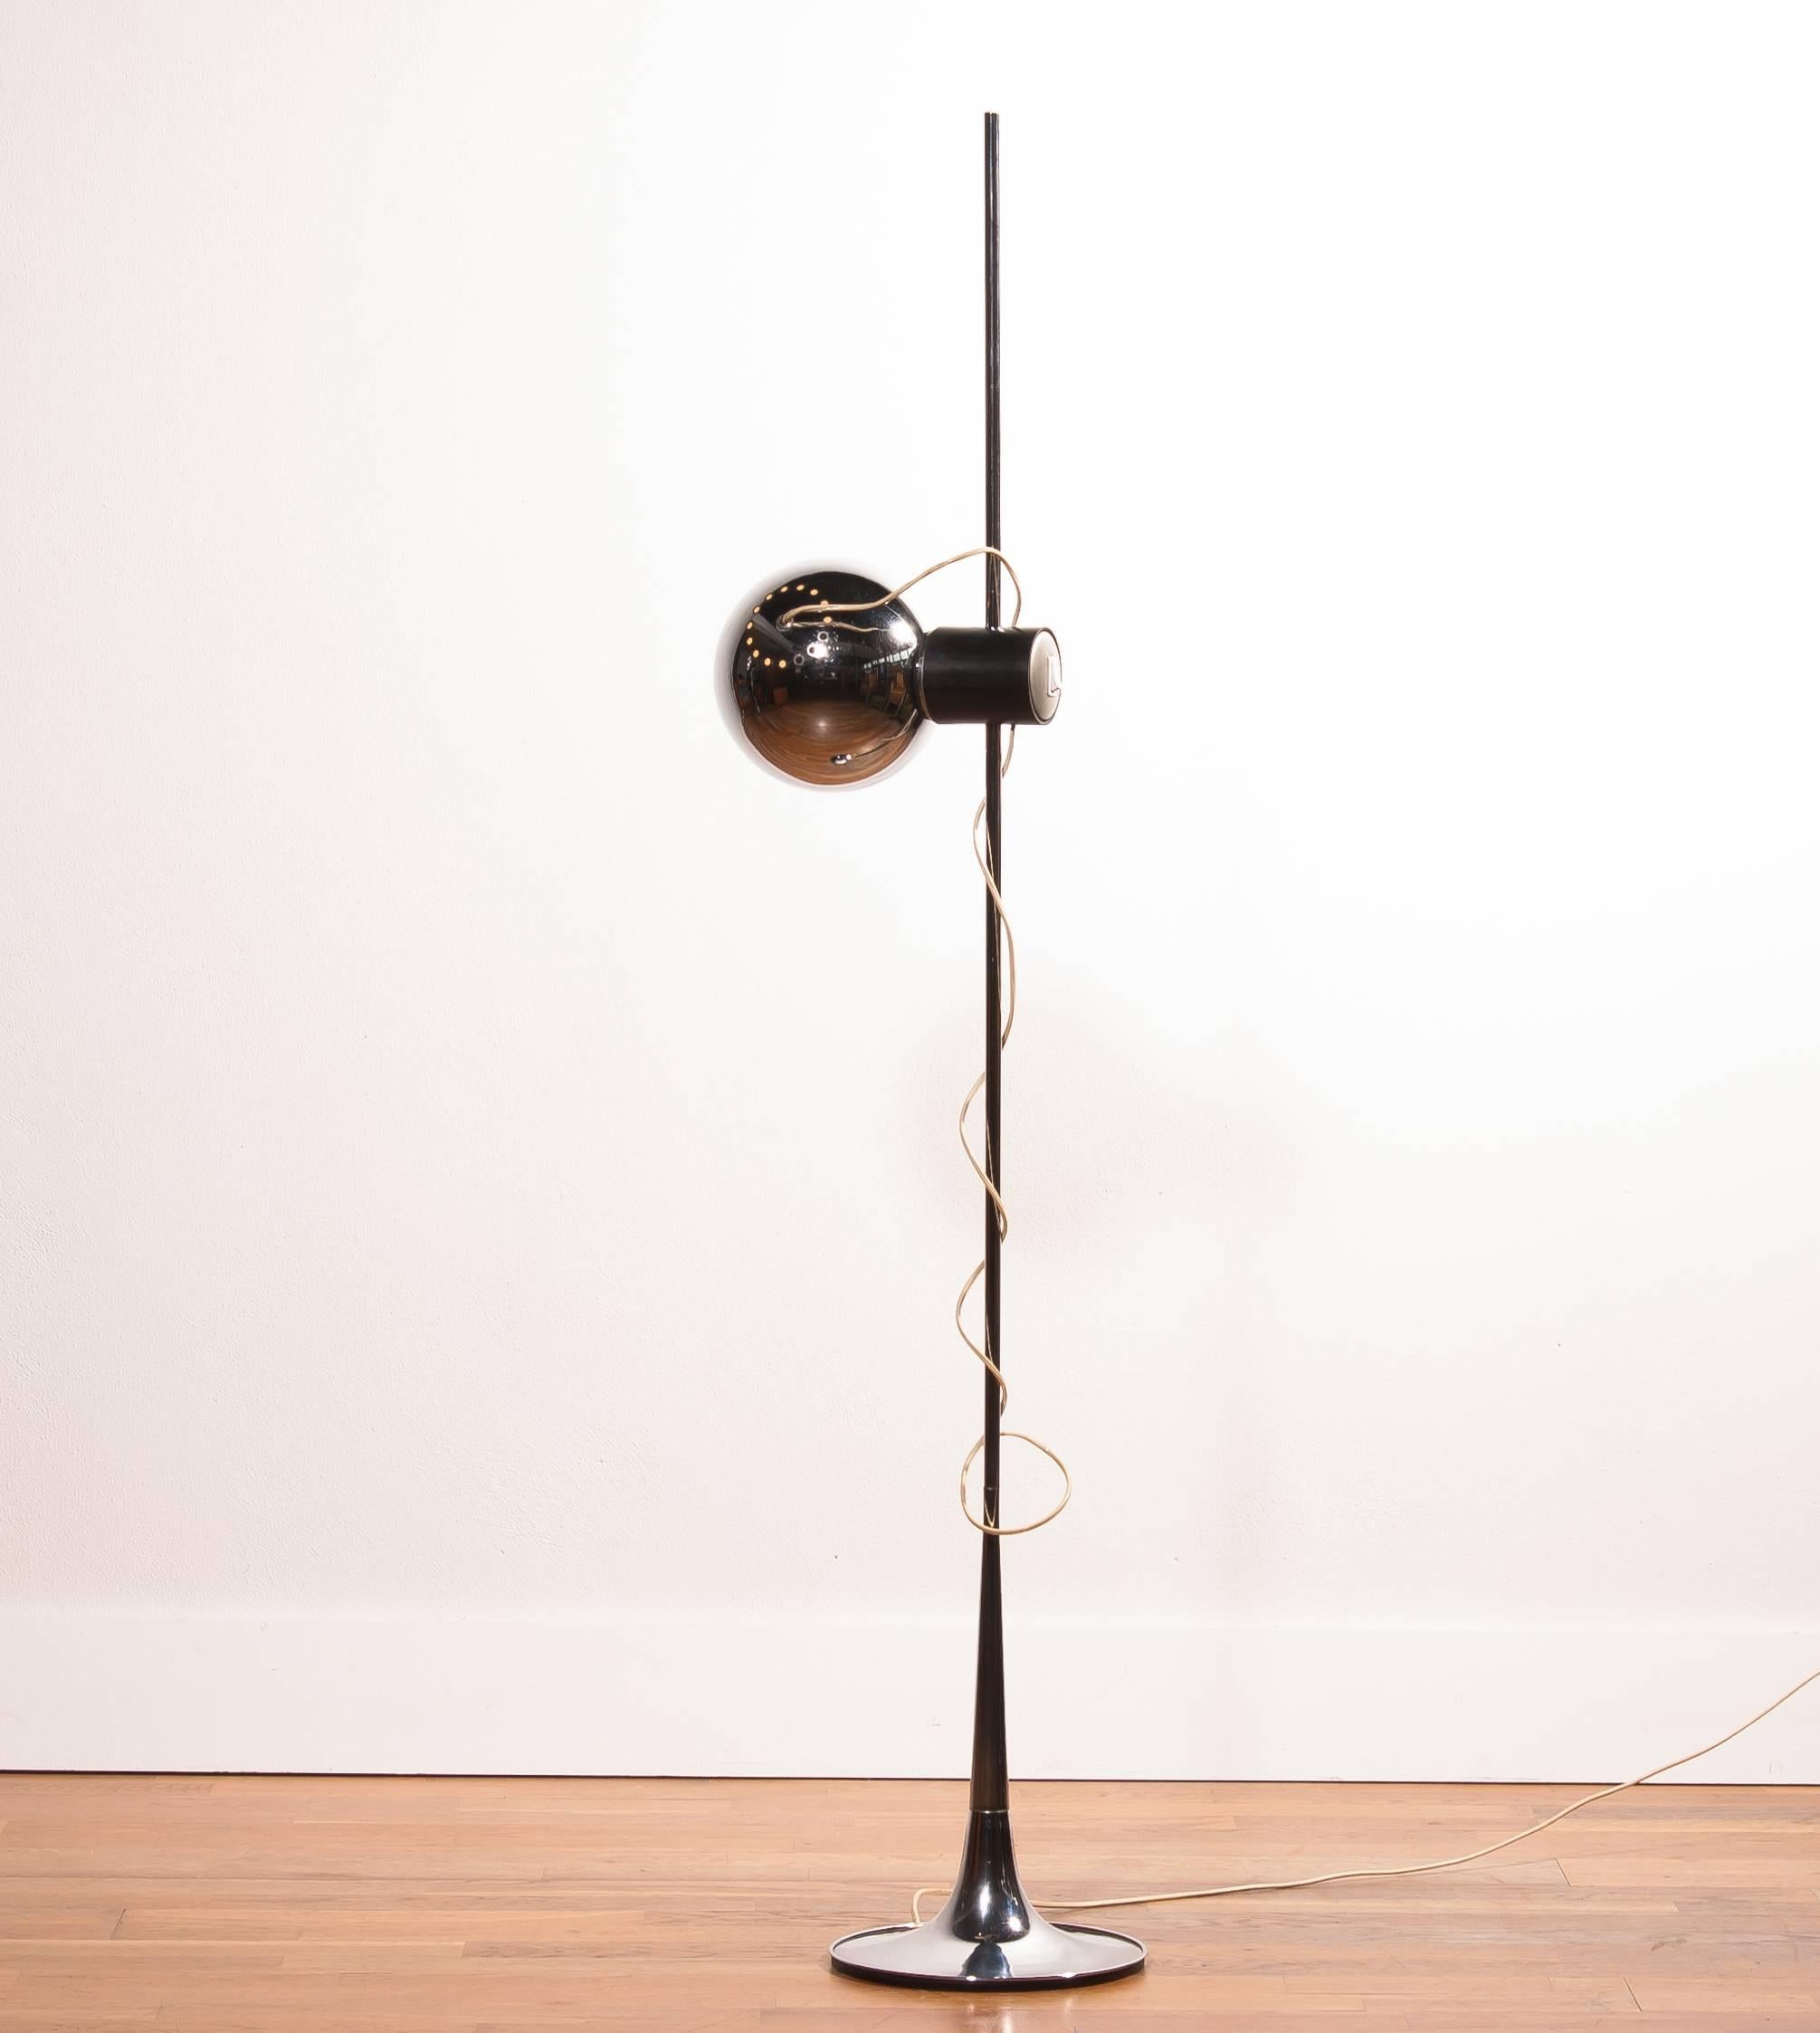 Beautiful floor lamp designed by Reggiani Lampadari, Italy.
The lamp shades slides up and down the stem.
It can be rotated in any position by a magnet system, so it is very multifunctional .
The Stand has a beautiful design.
Period